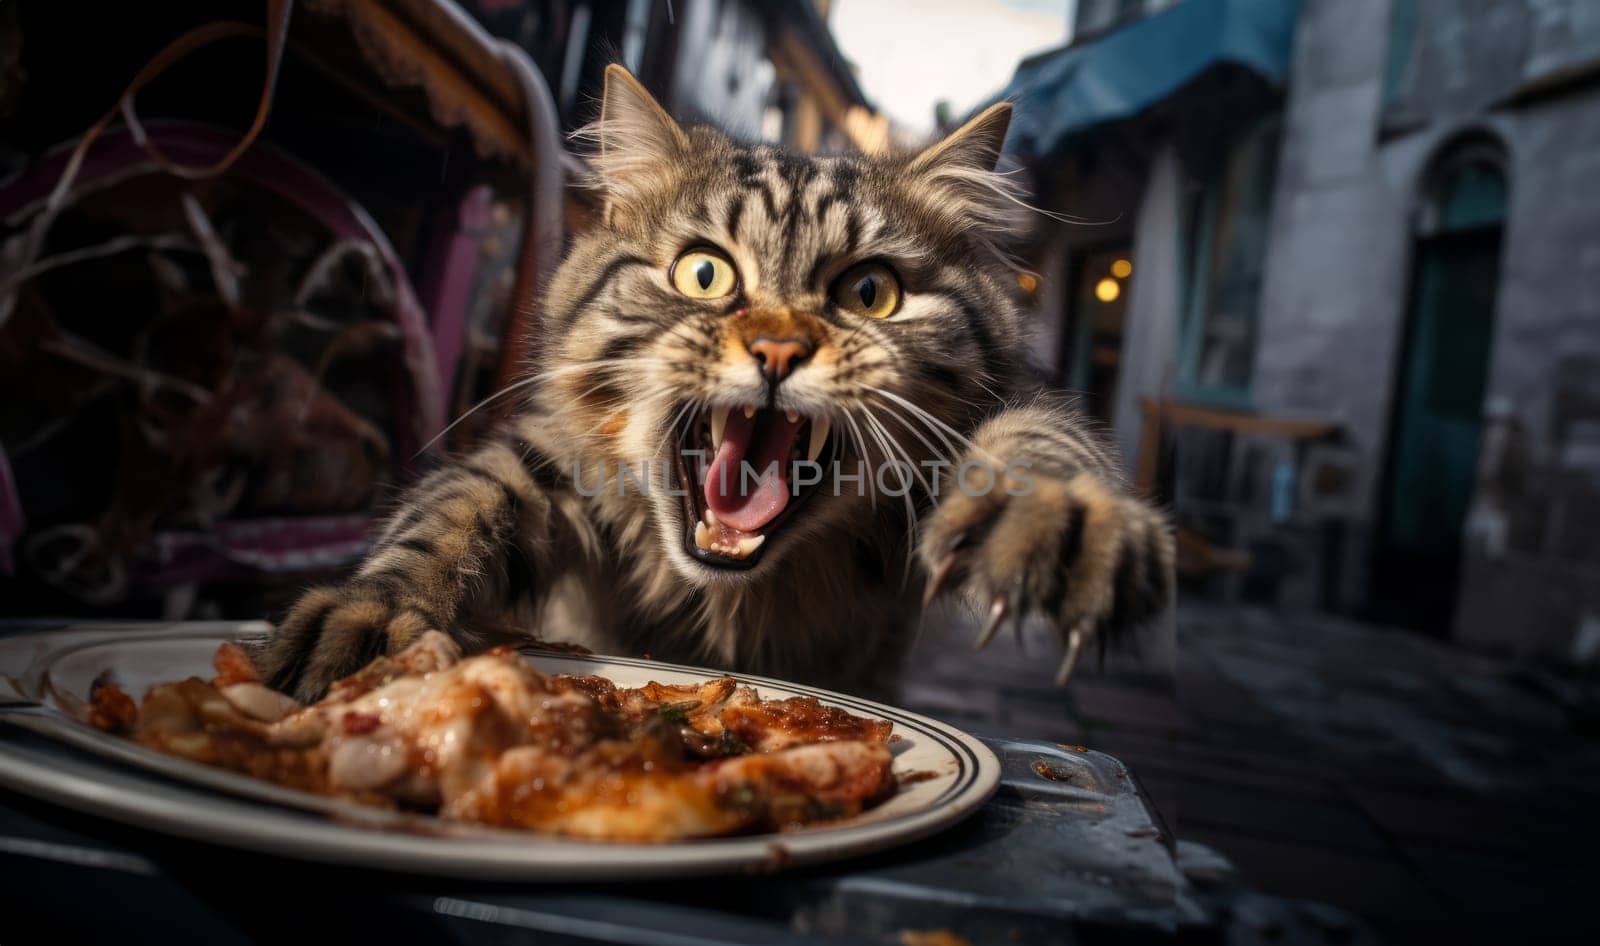 A hungry cat attacks its food with a wild fury.Generated image by dotshock